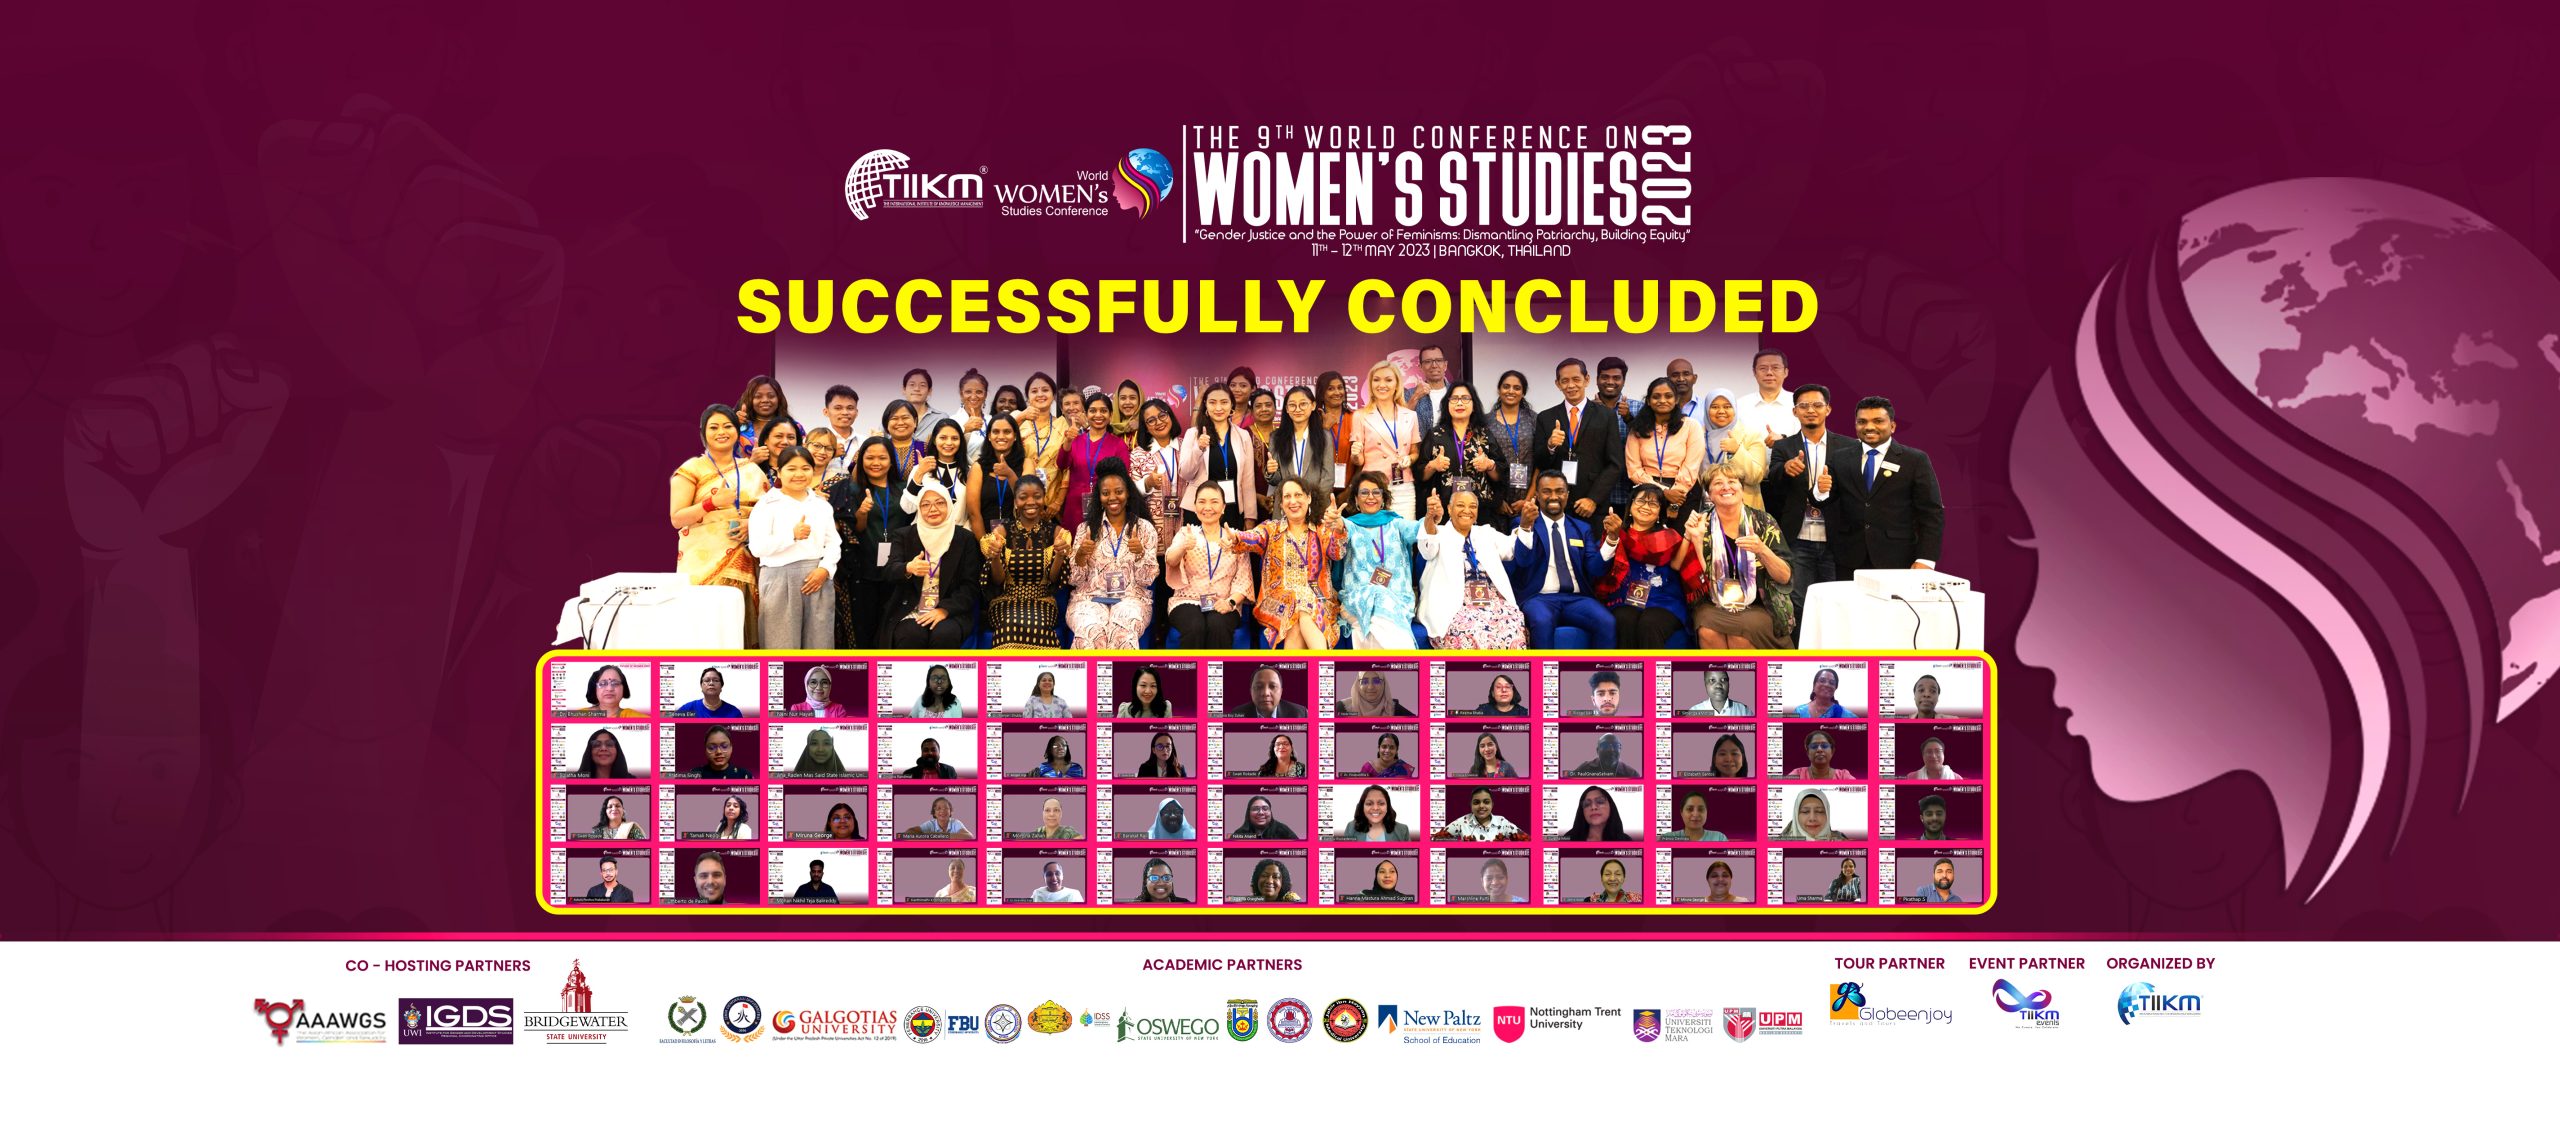 WCWS_2023_SUCCESSFULLY_CONCLUDED The 10th World Conference on Women's